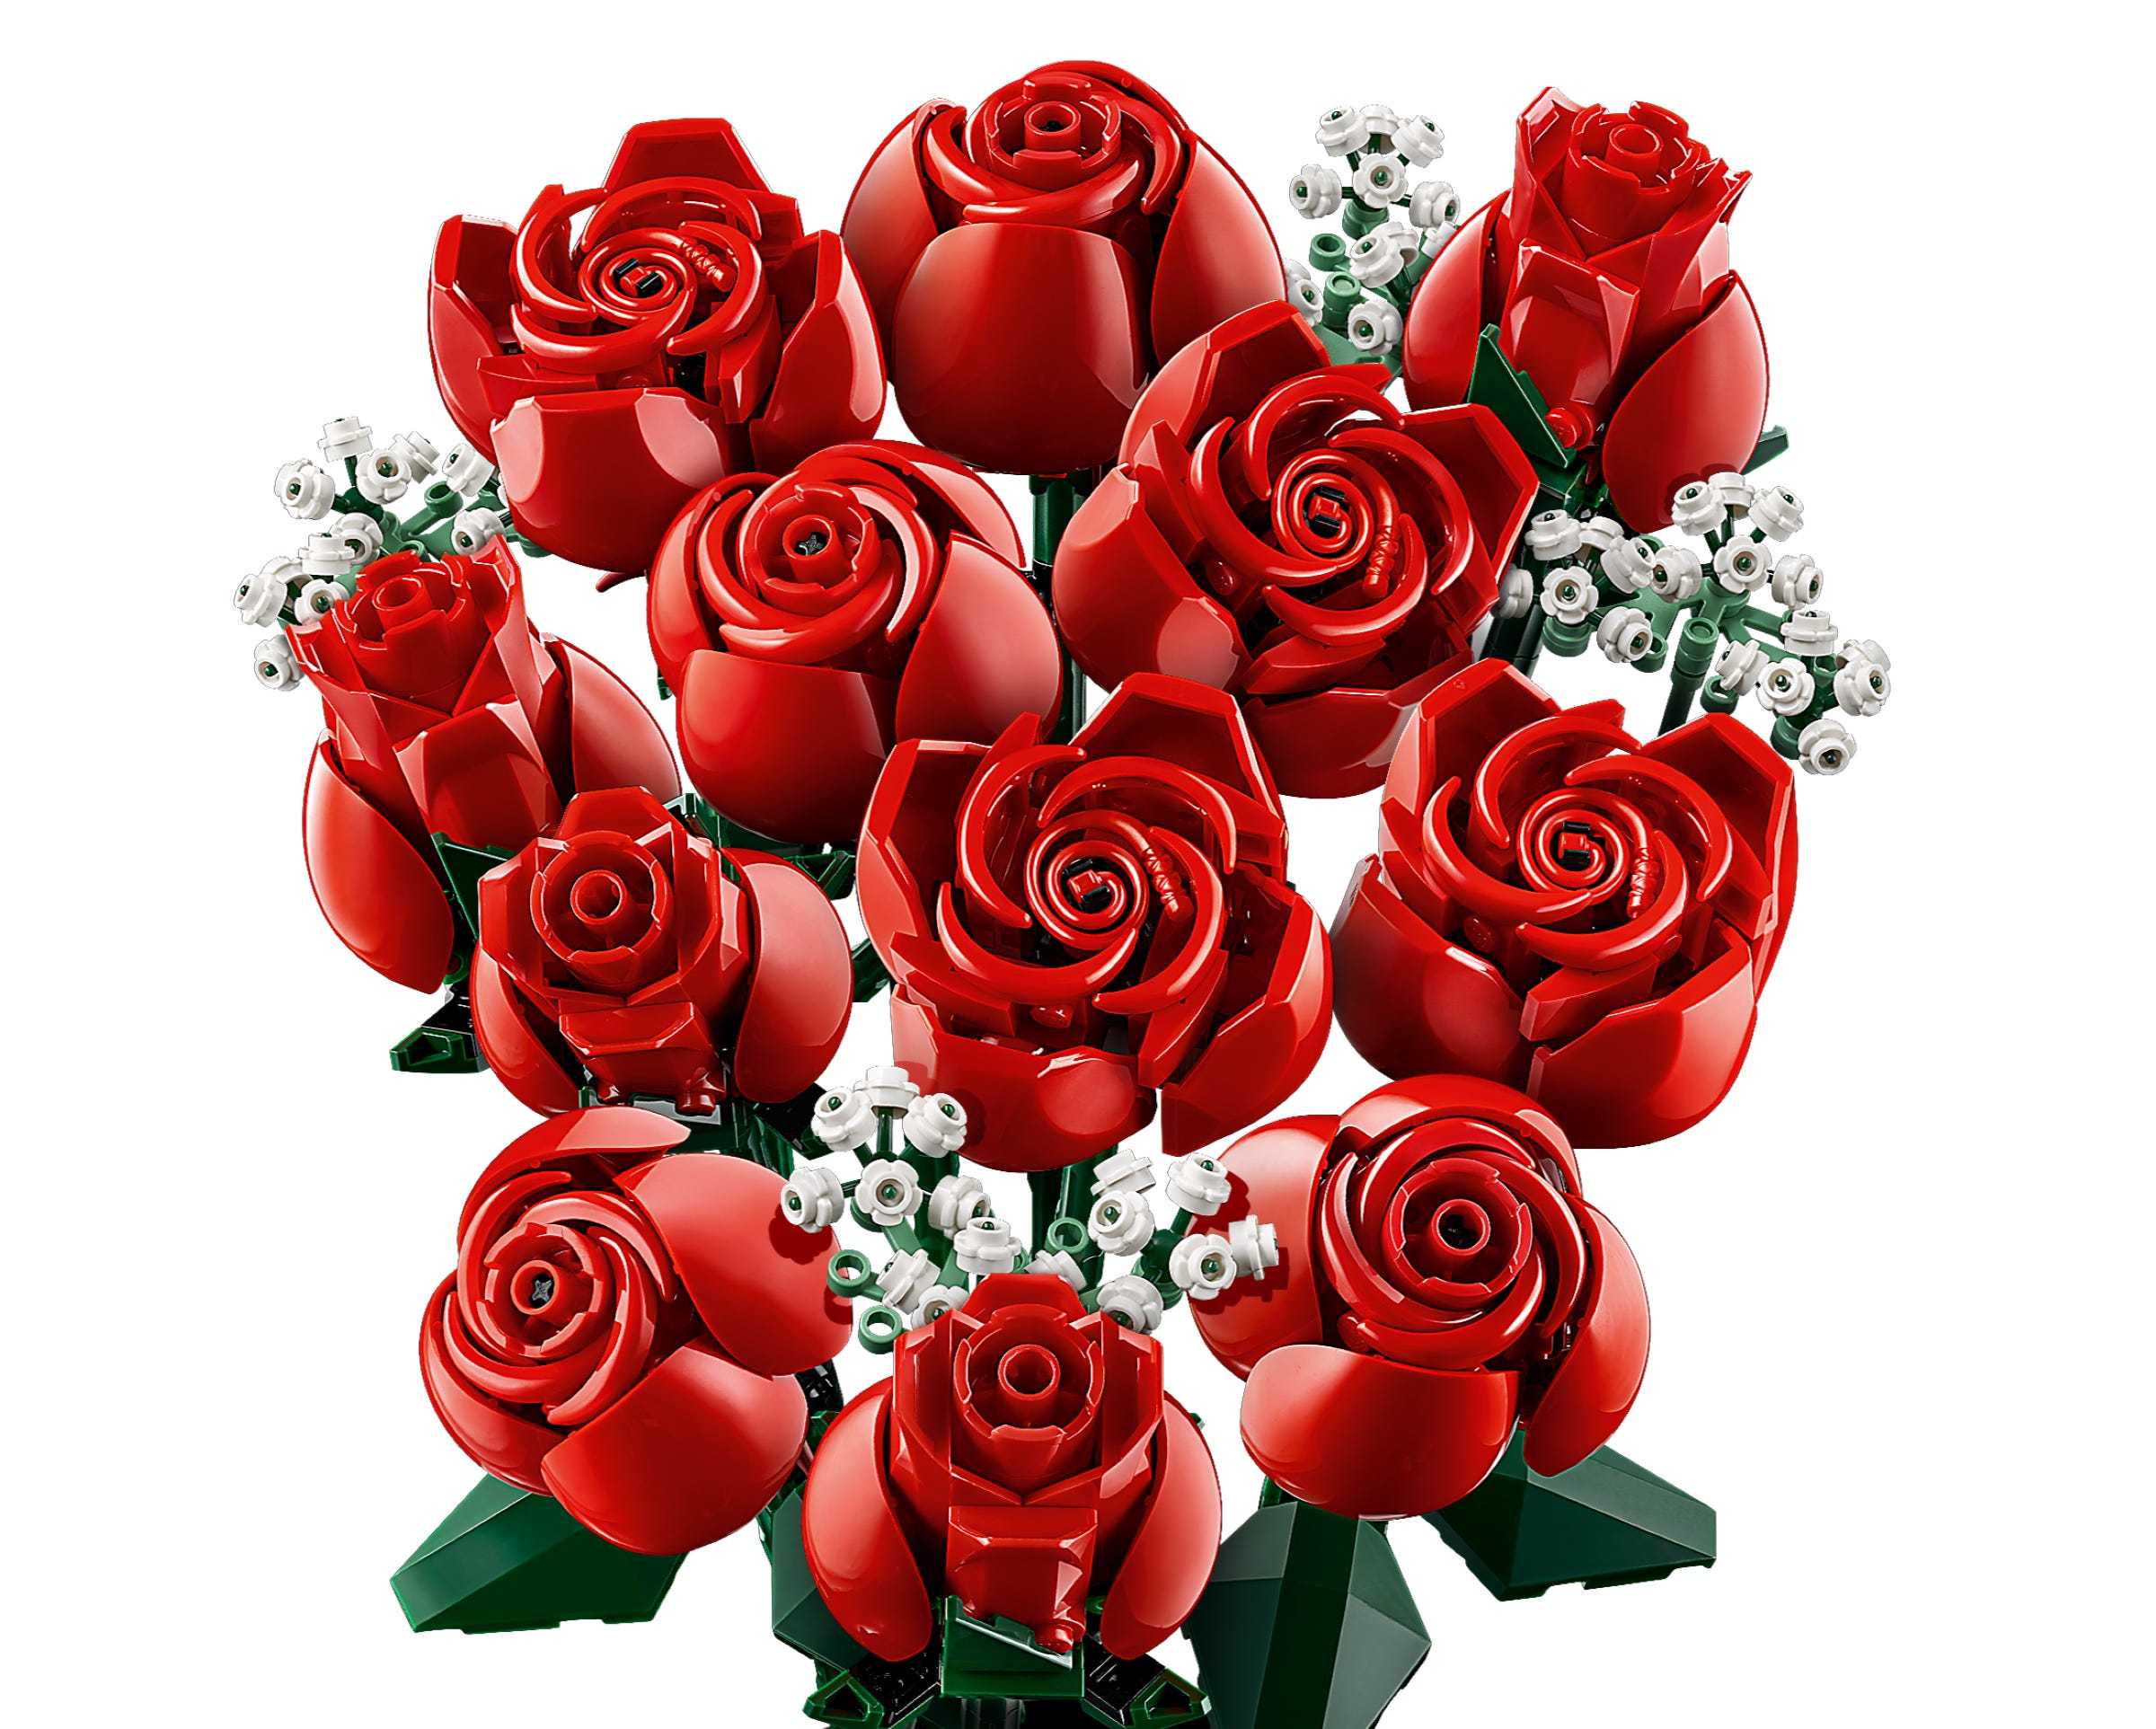 LEGO Rose Bouquet is a hot Valentine's Day gift in 2024